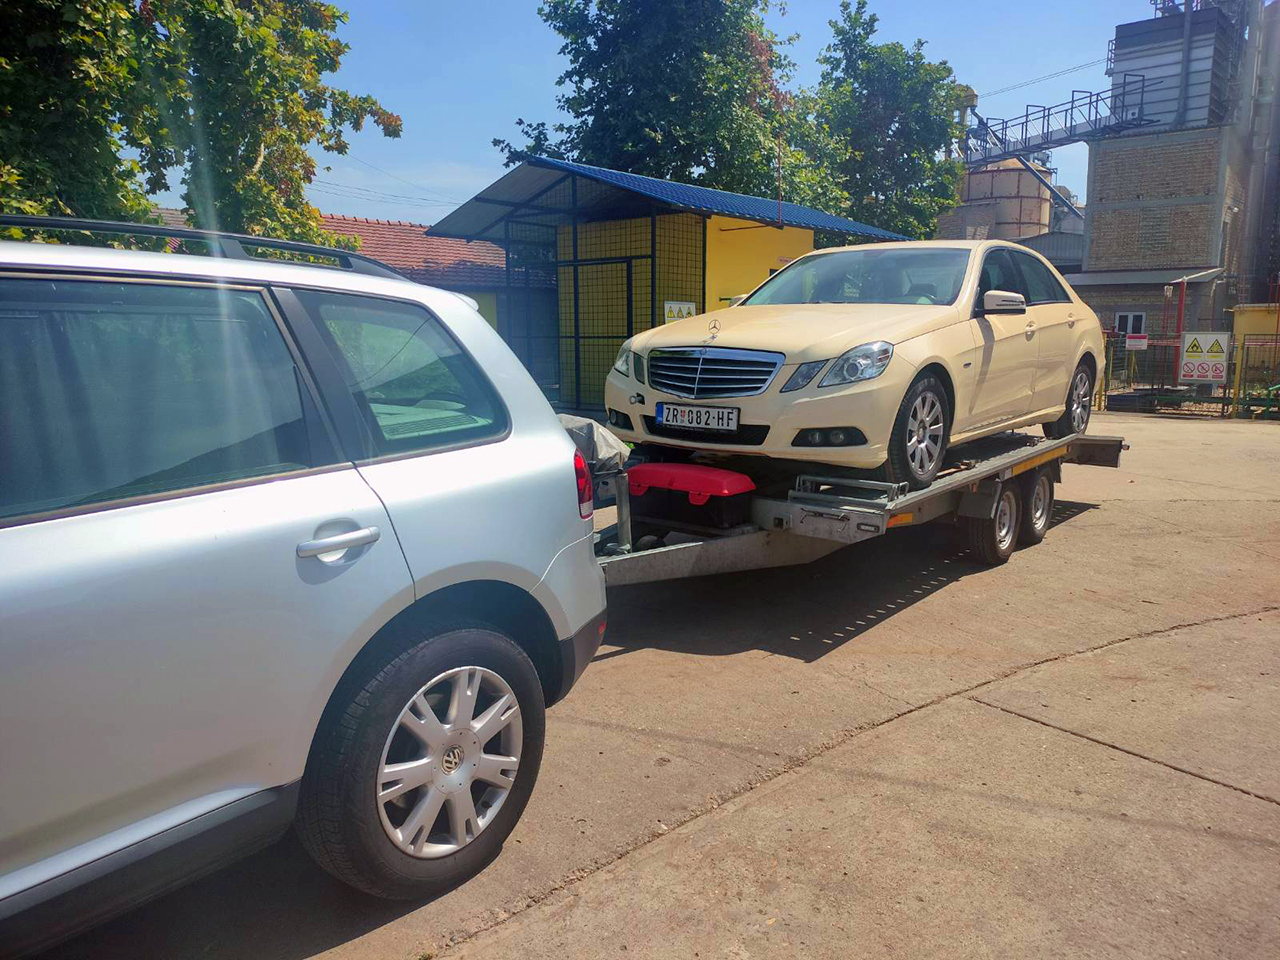 Photo 4 - TOWING SERVICE POPOVIC - Towing services, Zrenjanin